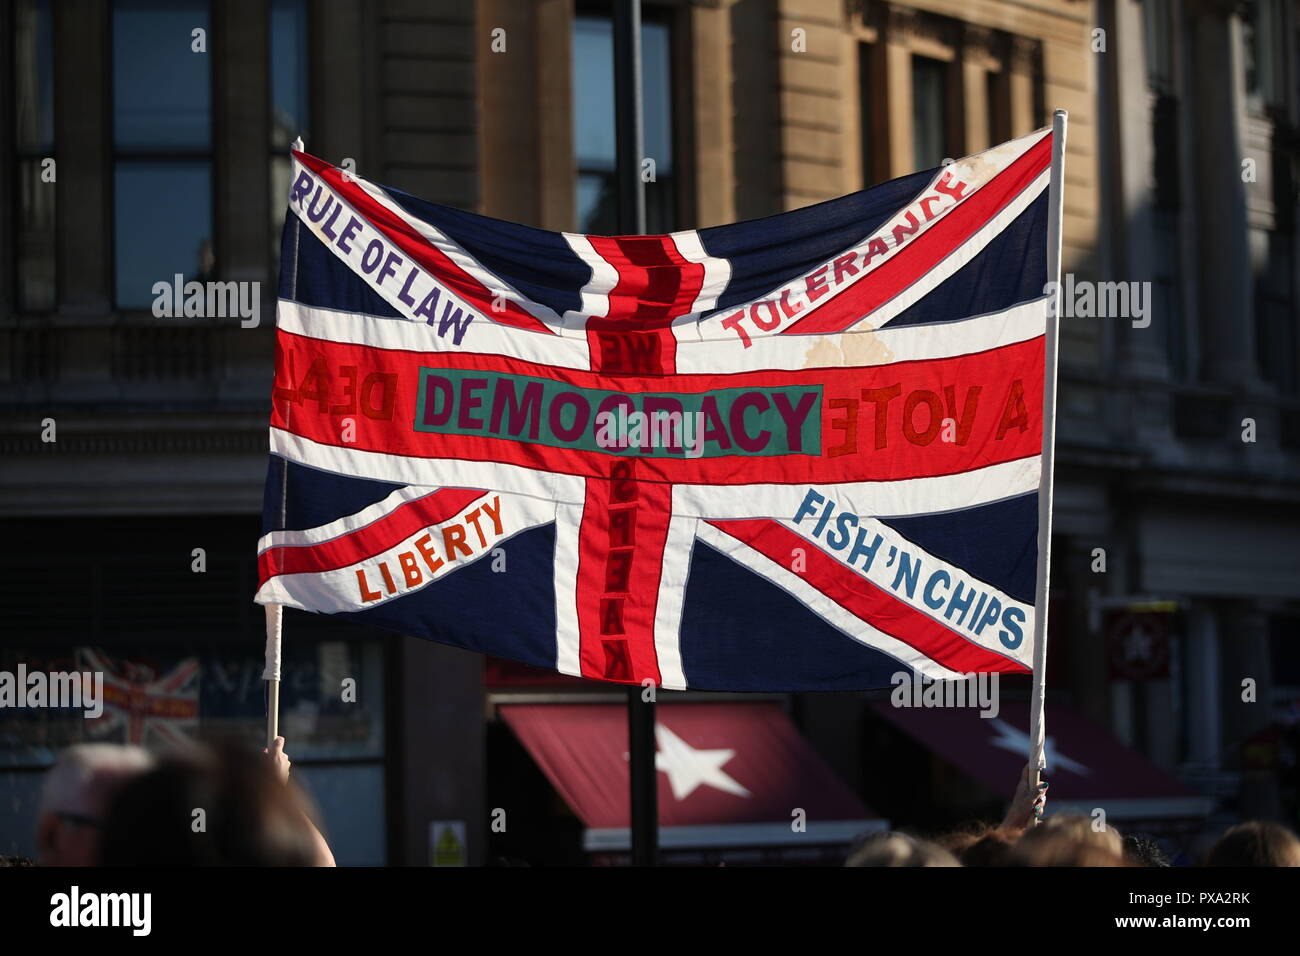 A protester holds a Union flag with slogans including &quot;Democracy&quot;, &quot;Rule of Law&quot;, &quot;Liberty&quot;, &quot;Tolerance&quot; and &quot;Fish 'n' Chips&quot; during the People's Vote March for the Future in London, a march and rally in support of a second EU referendum. Stock Photo